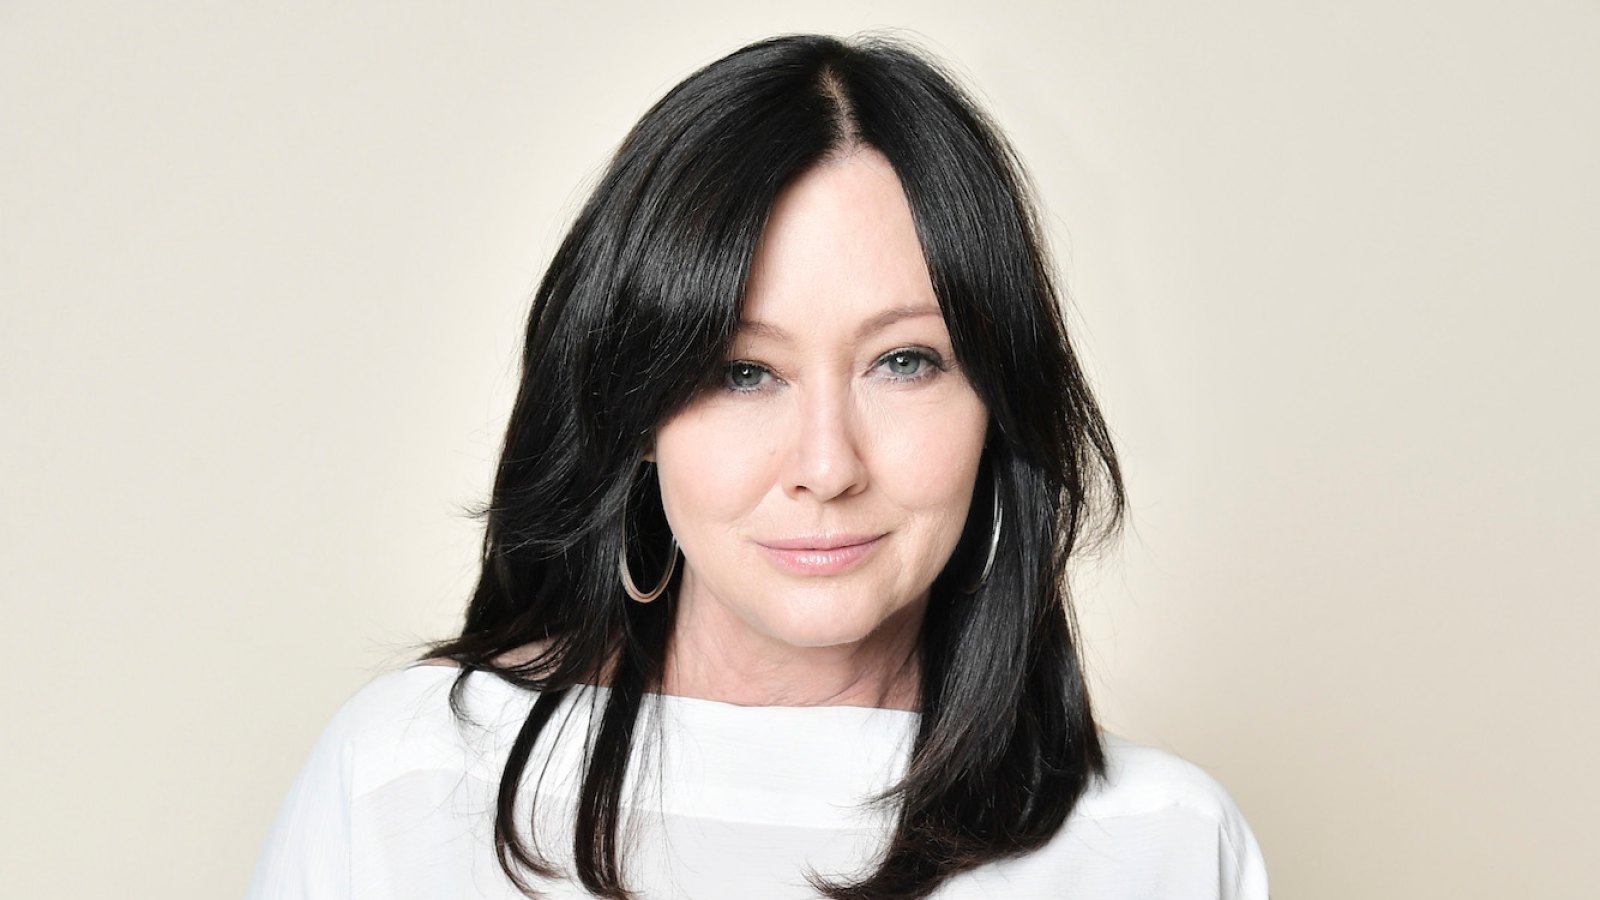 Shannen Doherty Is Thankful to Be Here on Christmas After Tough Year